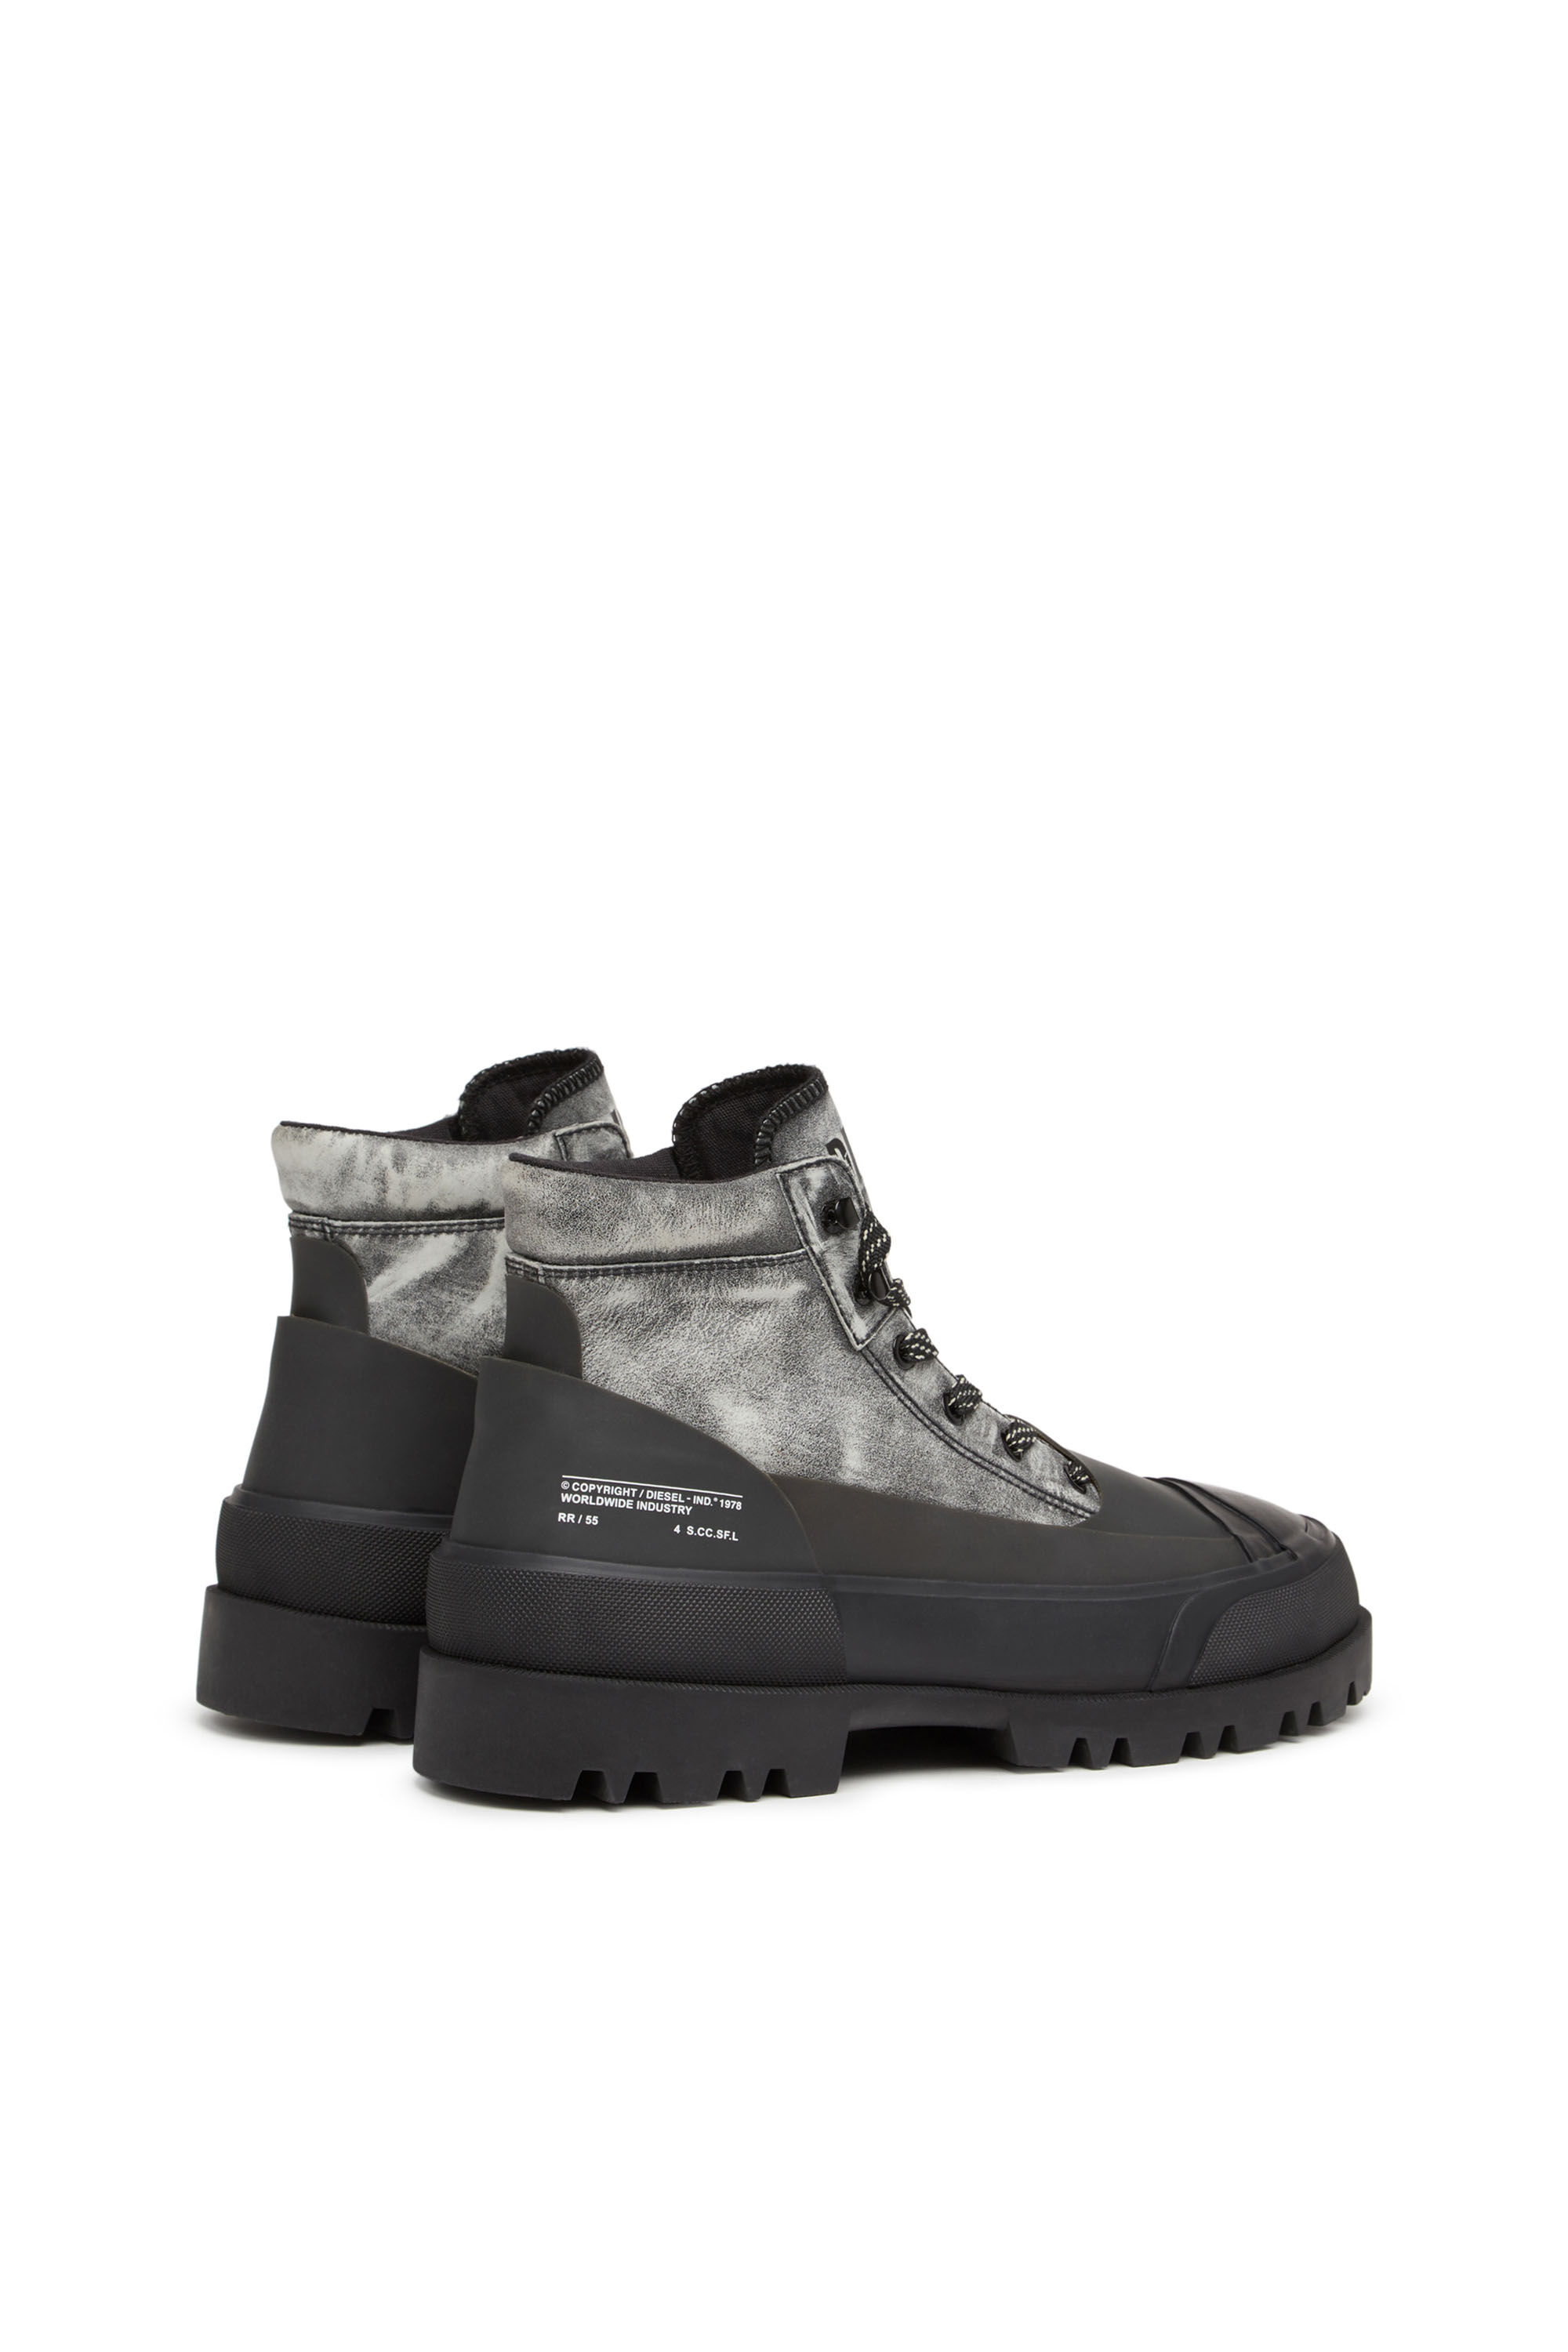 Women's D-Hiko BT X - Treated leather boots with rubber overlay